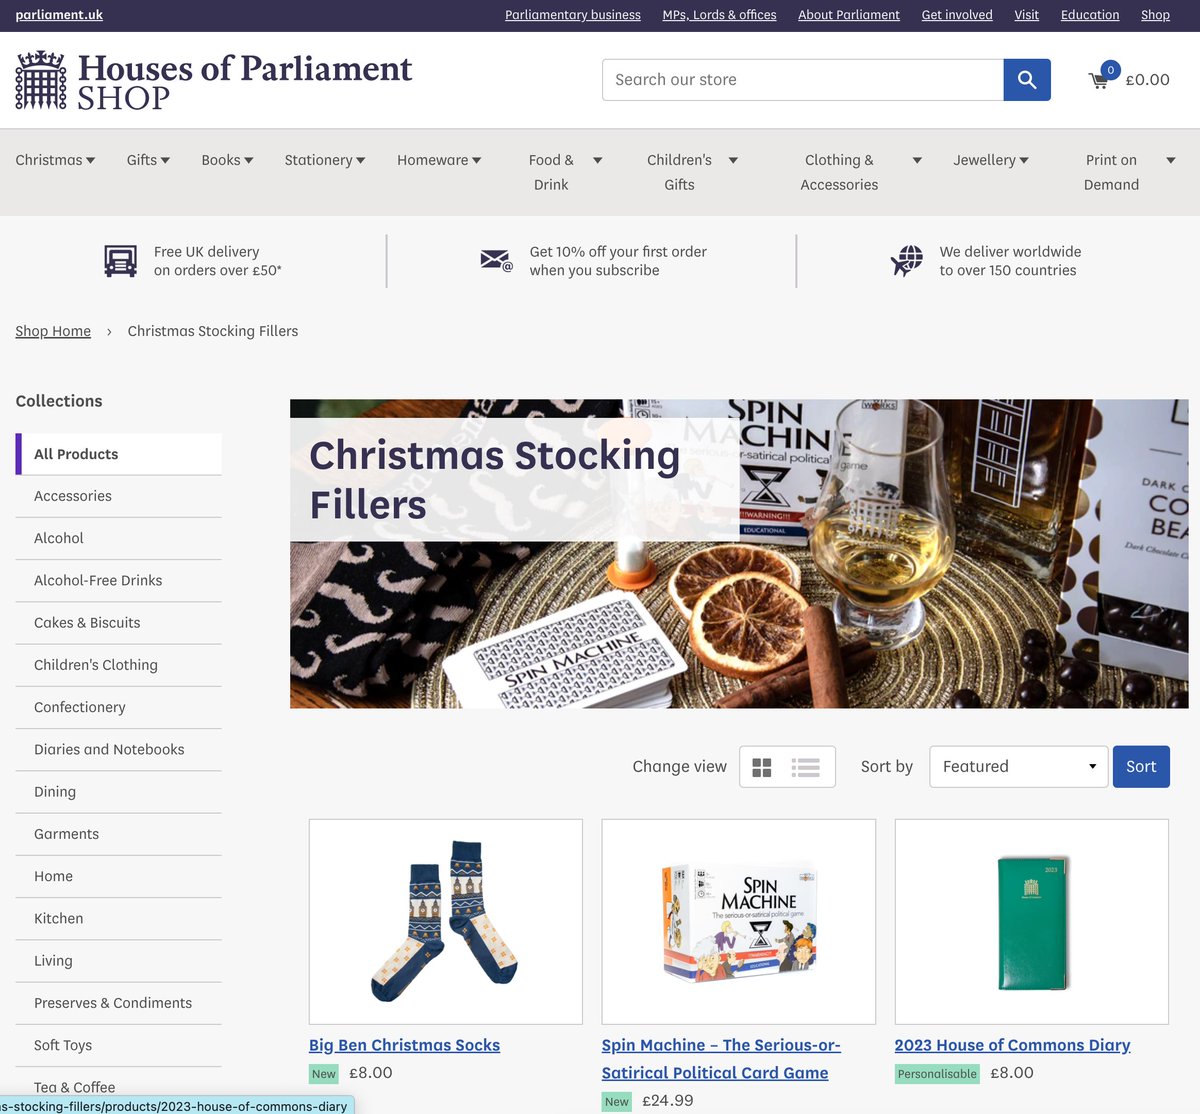 🚨📢 Over the moon to say that now you can find Spin Machine directly in the @UKParliament shop - and in perfect time for Christmas!